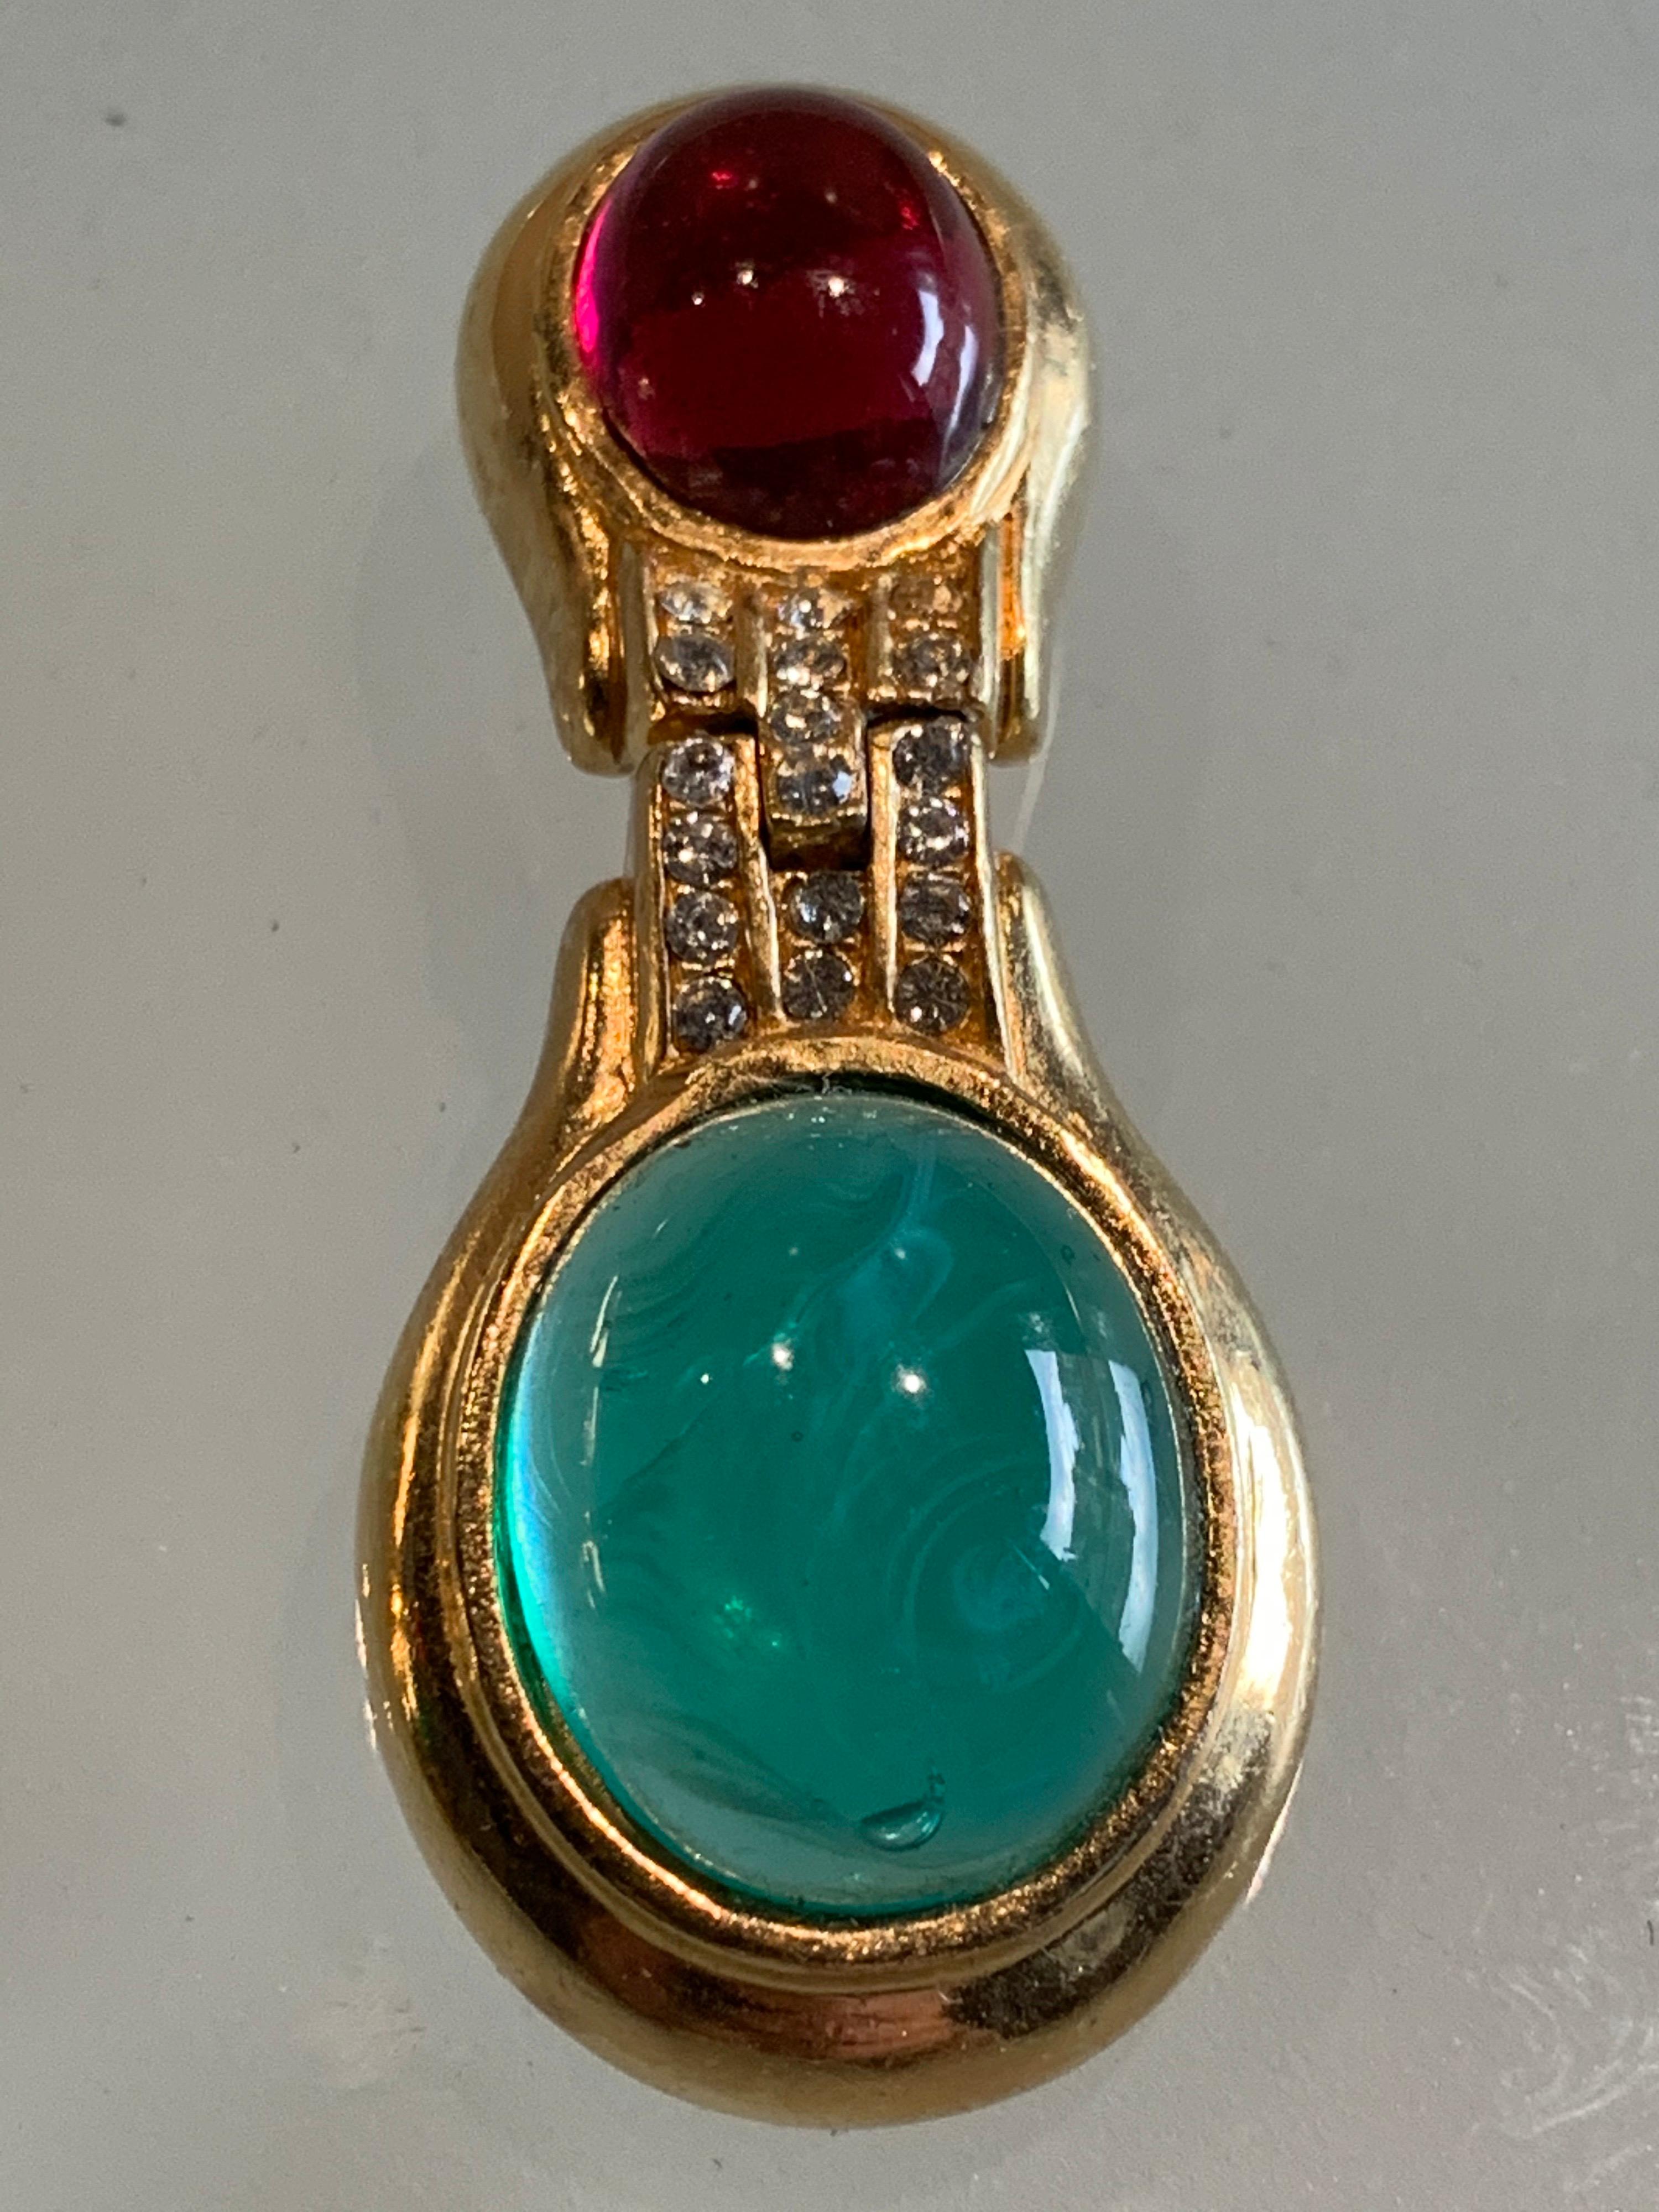 Beautiful 1980s Ciner Art Deco-inspired gold-tone clip-on earrings with jade green glass cabochon and smaller ruby red cabochon accented by smaller rhinestones. Hinged for movement. 